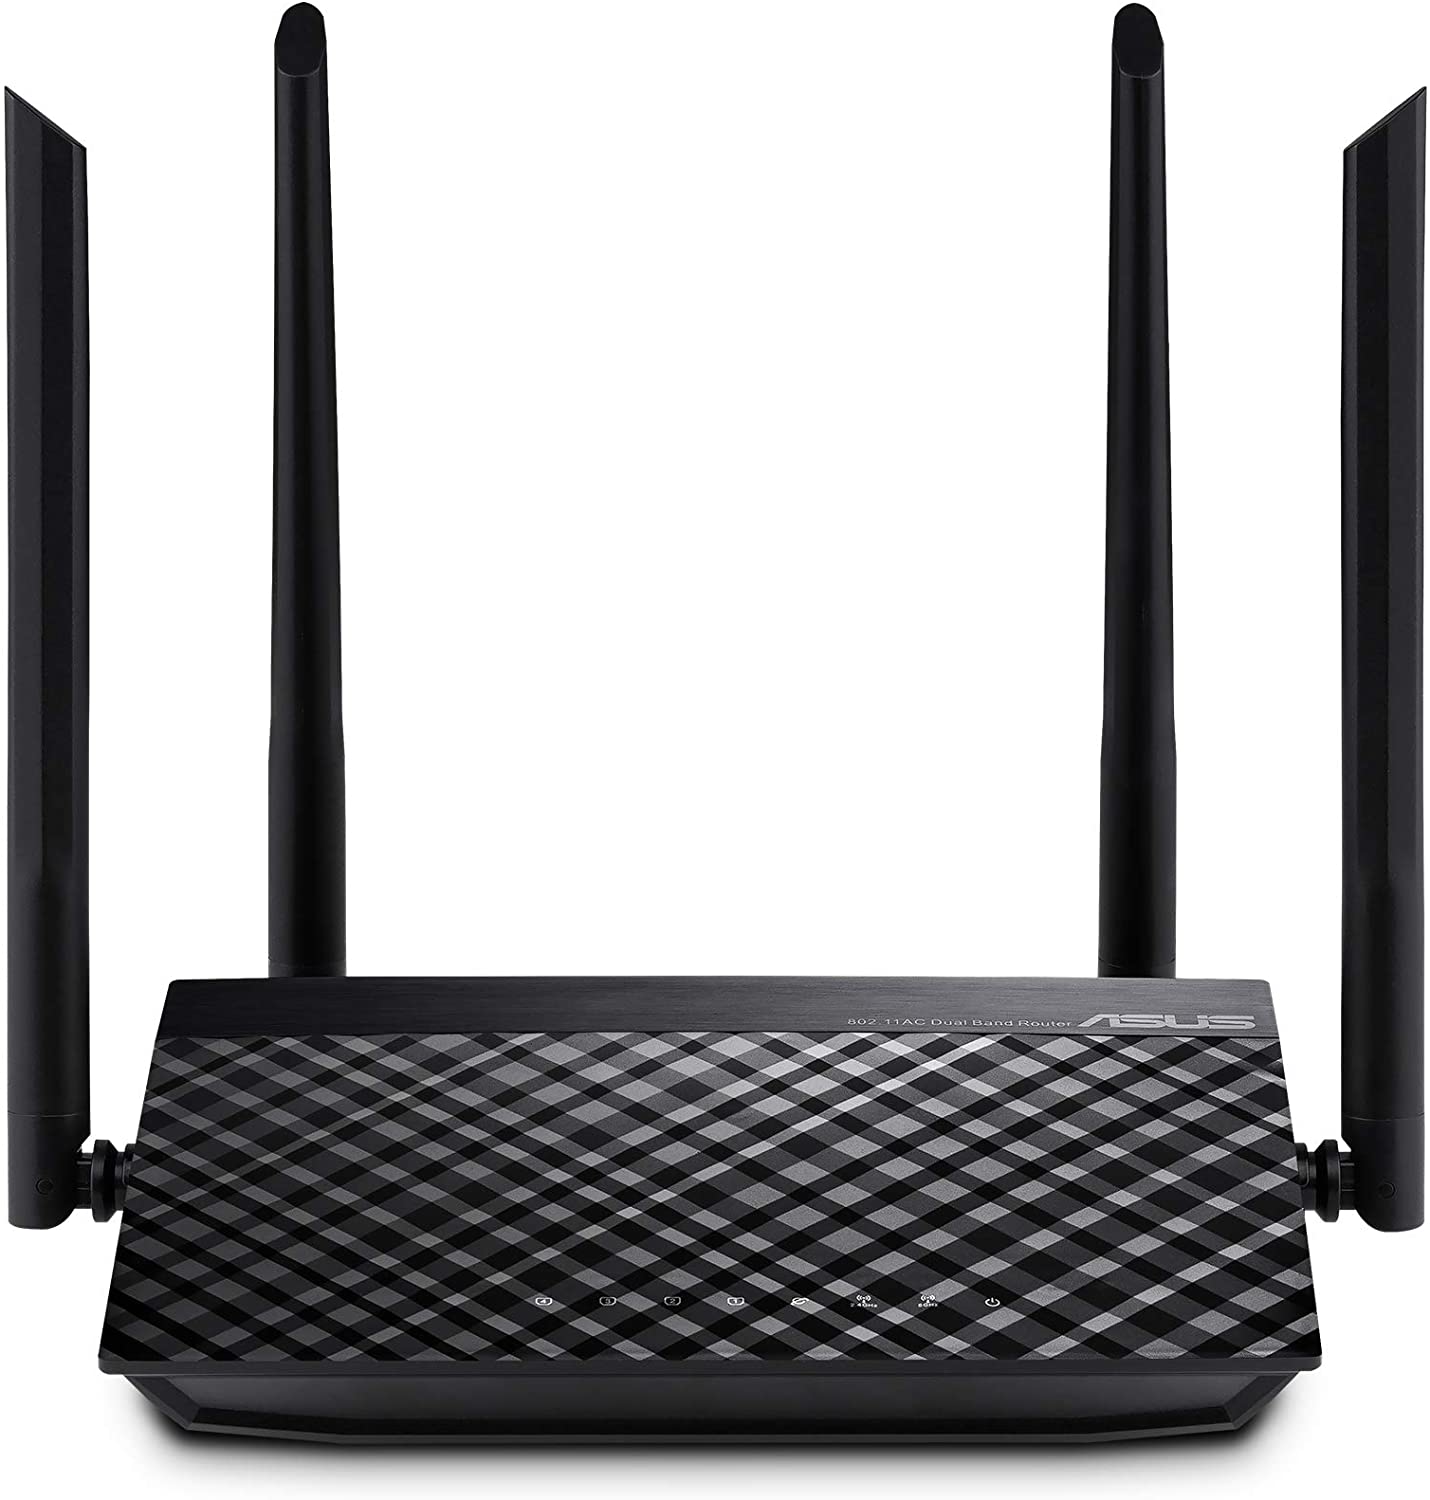 Router ASUS RT-N300/B1, 300 Mbit/s, 2,4 GHz, 2,4 GHz, Externo, 2